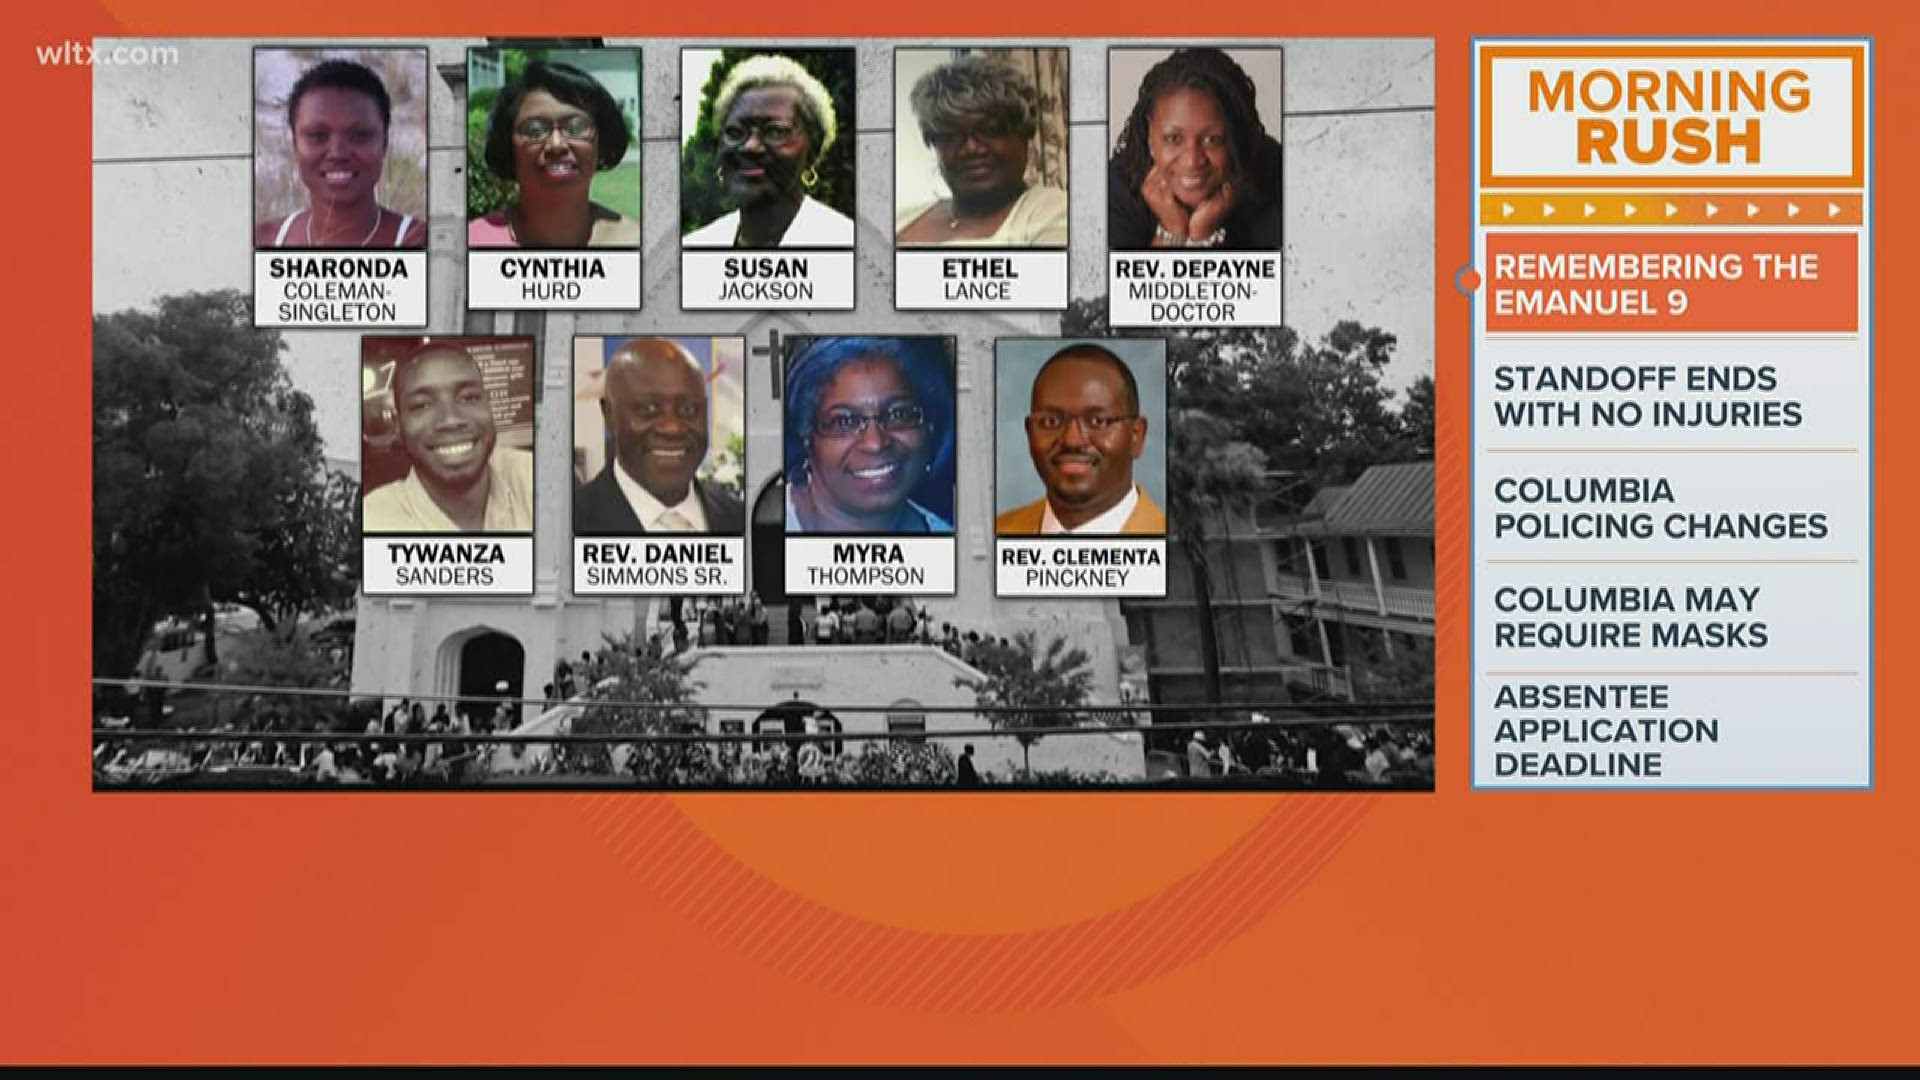 Remembering the nine victims of the Mother Emanuel AME Church massacre in Charleston, South Carolina on the 5th anniversary